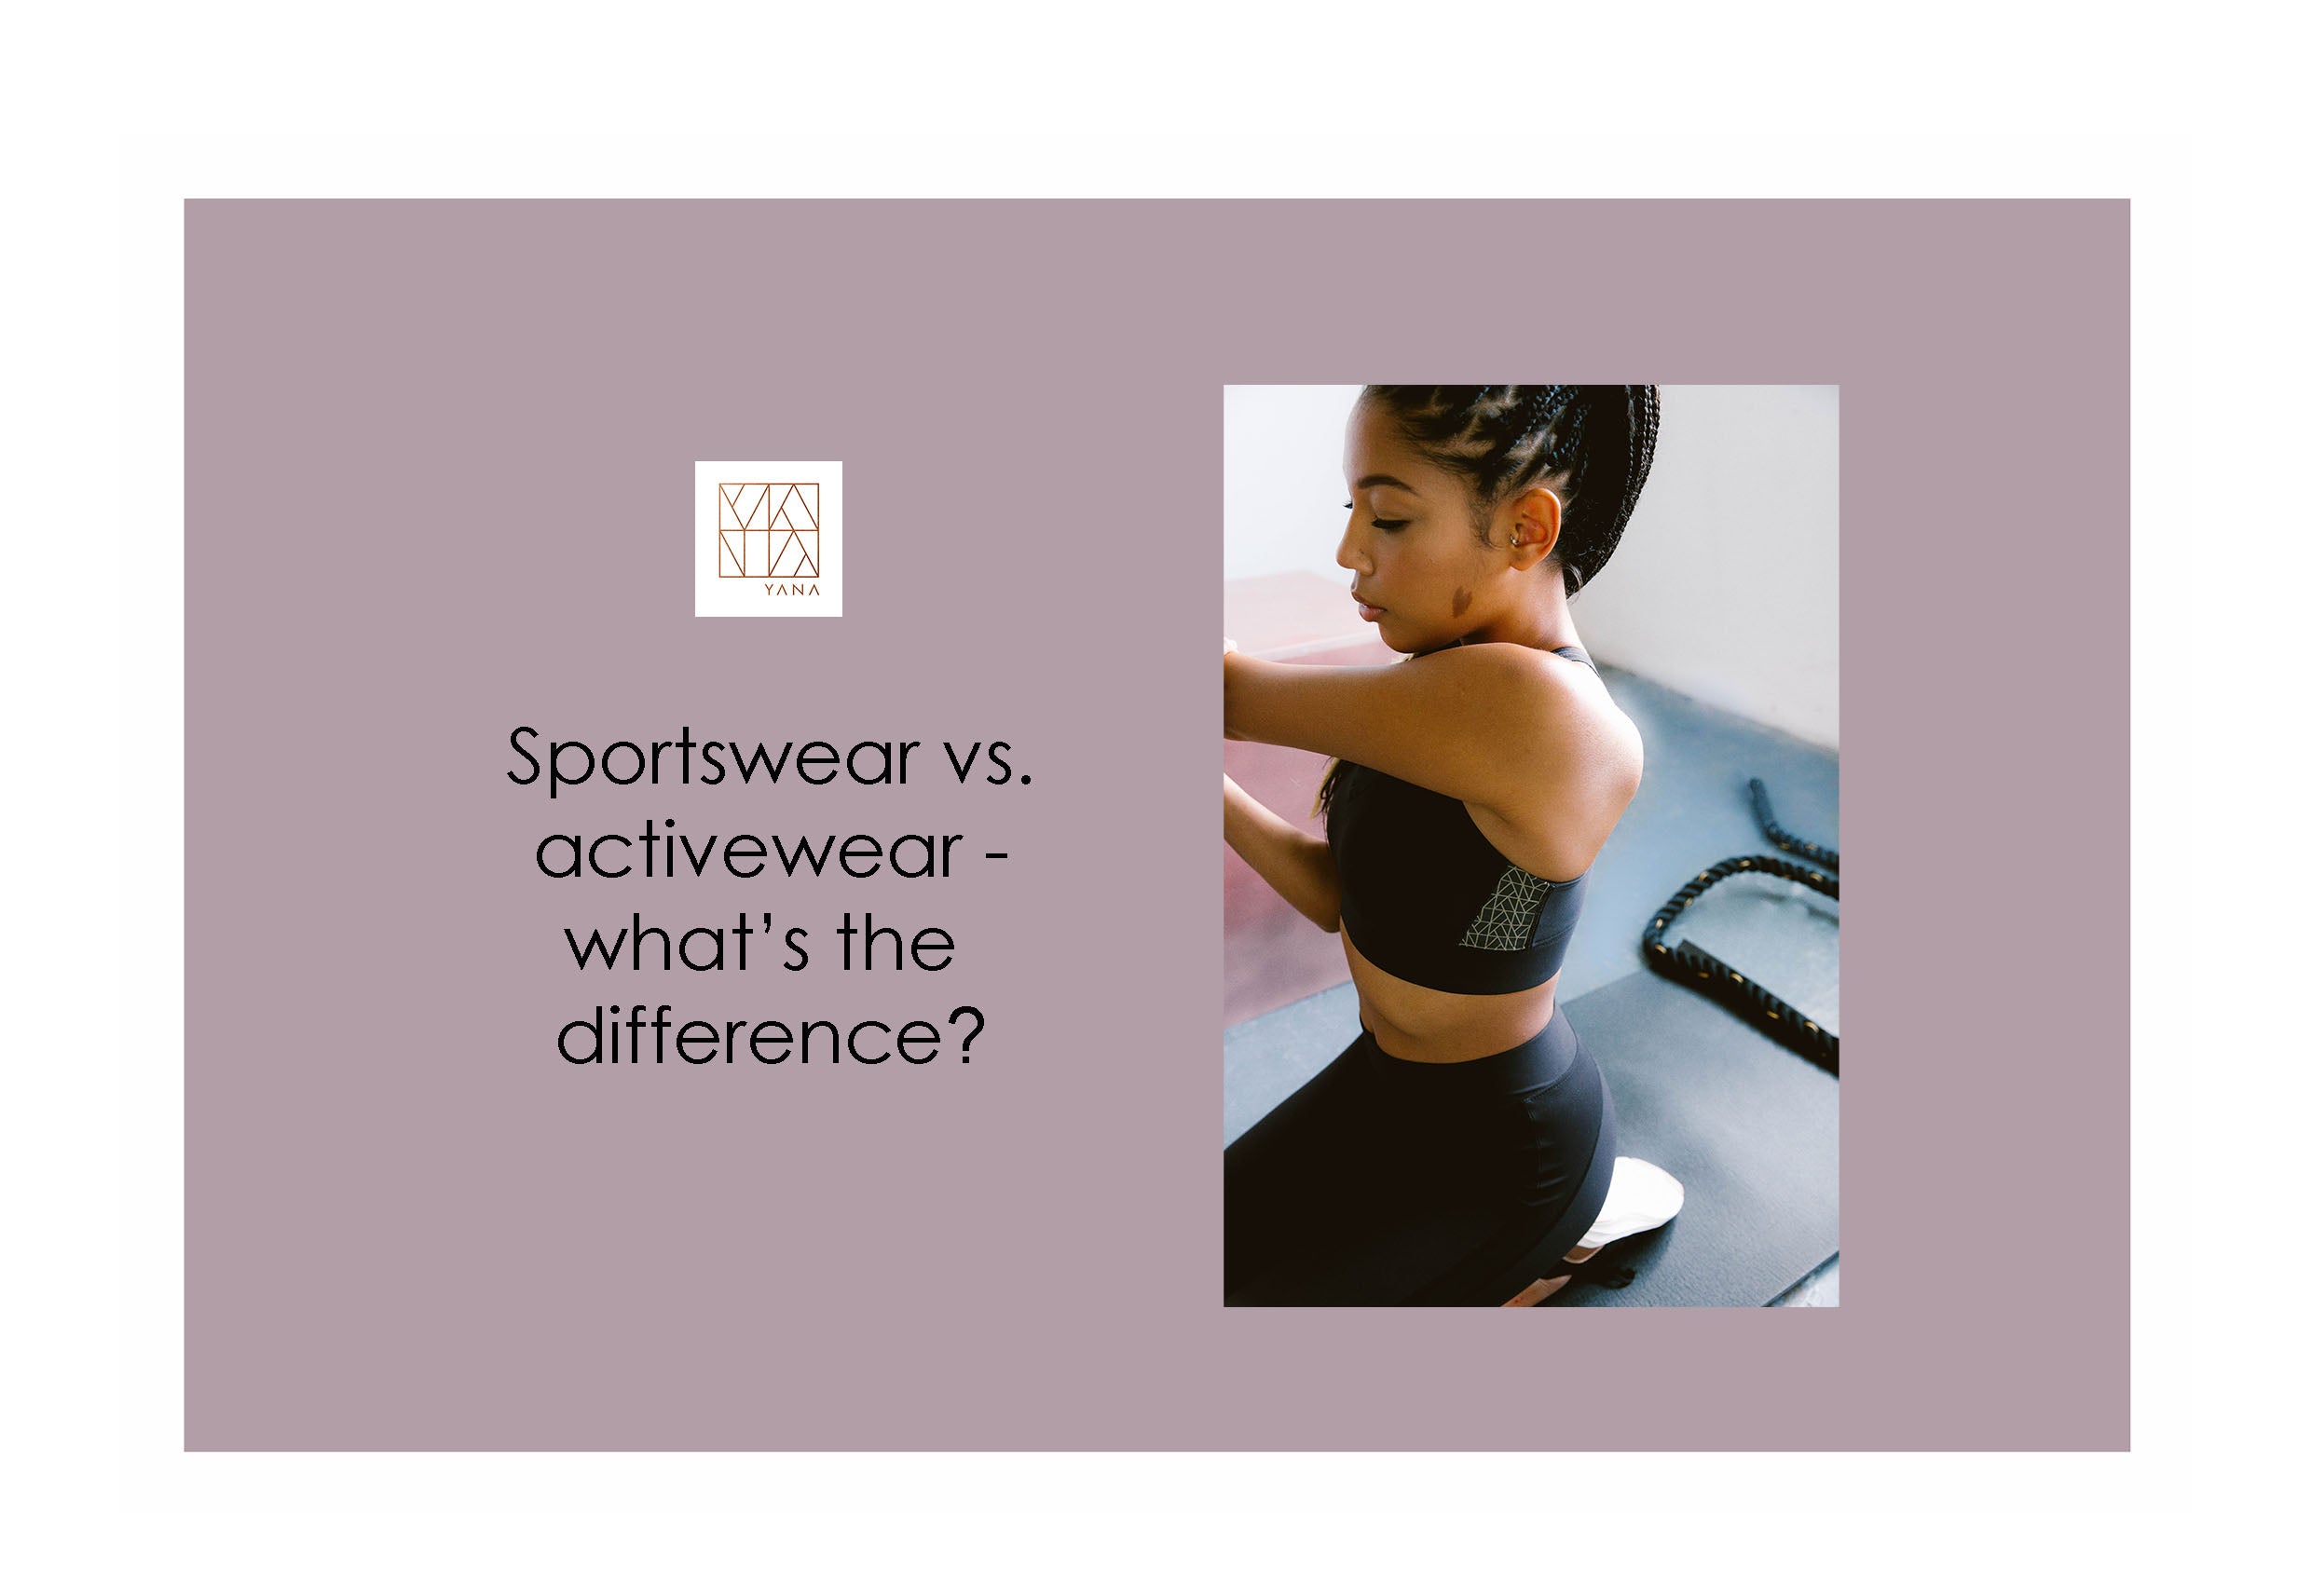 Sportswear and Technical Sportswear: What's the Difference?